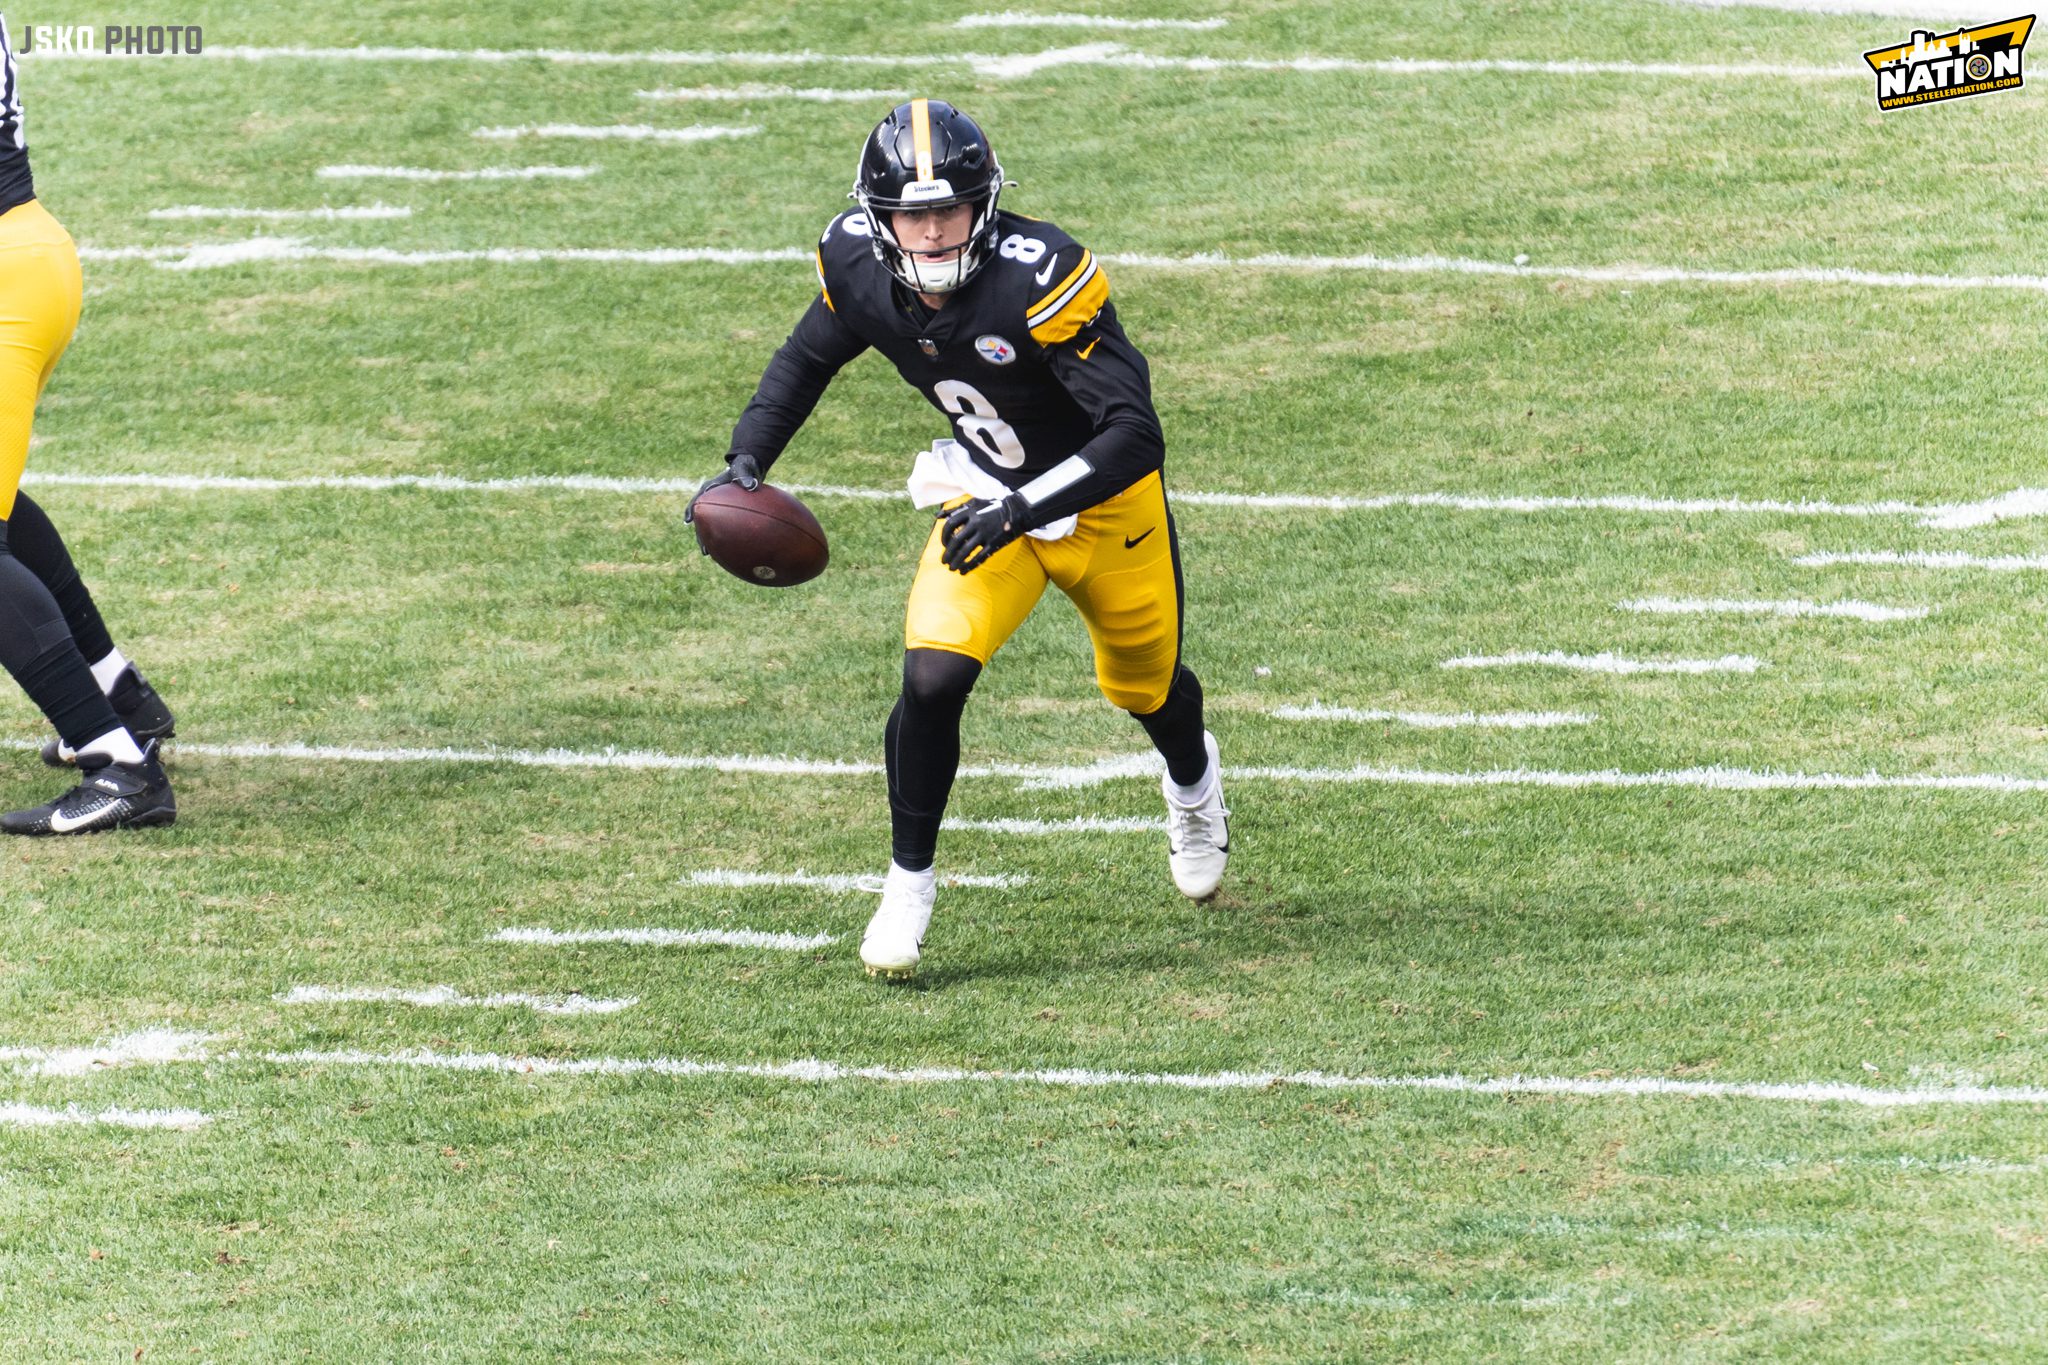 The Steelers May Be Entangled In NFL's Toughest Division As AFC North